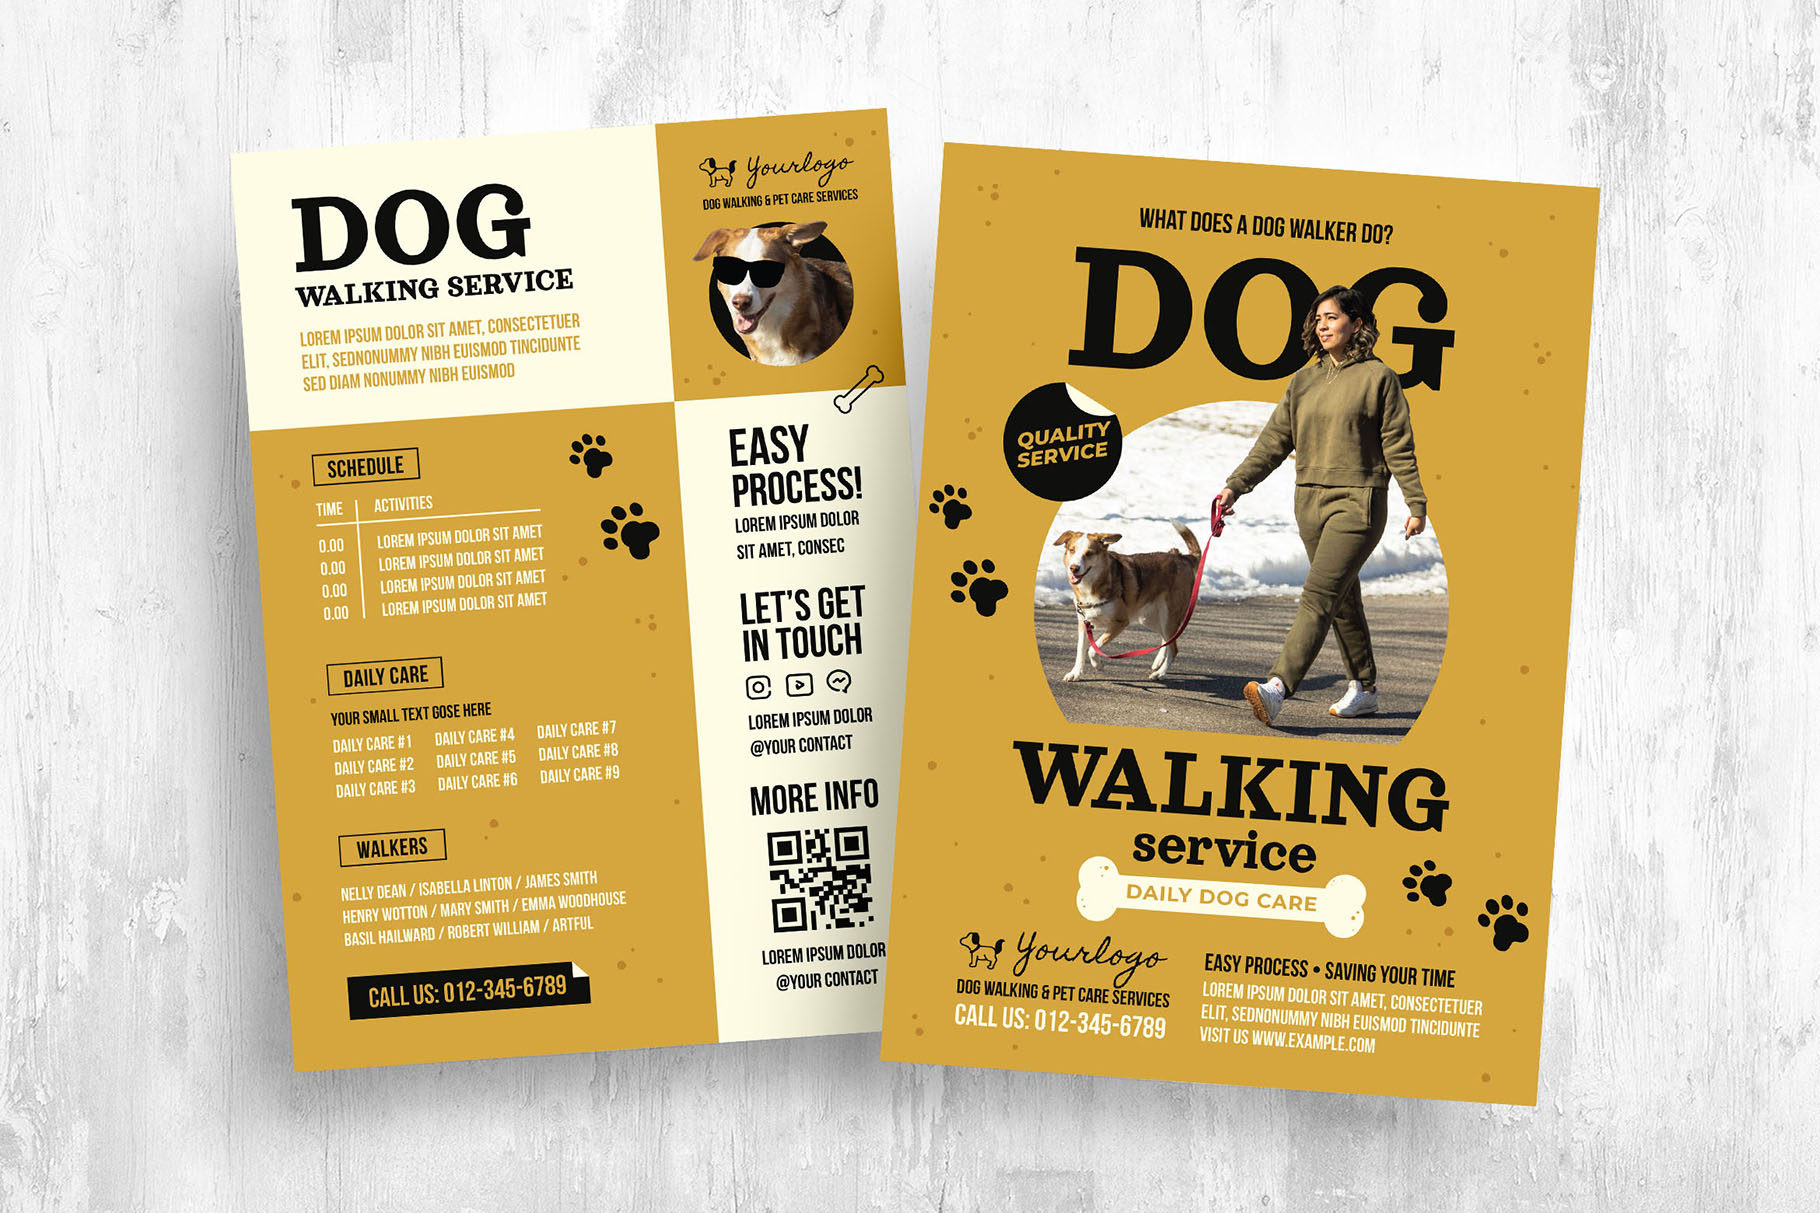 Dog Walking Service Flyer Template [PSD, Ai, Vector] - BrandPacks With Regard To Dog Walking Flyer Template Free